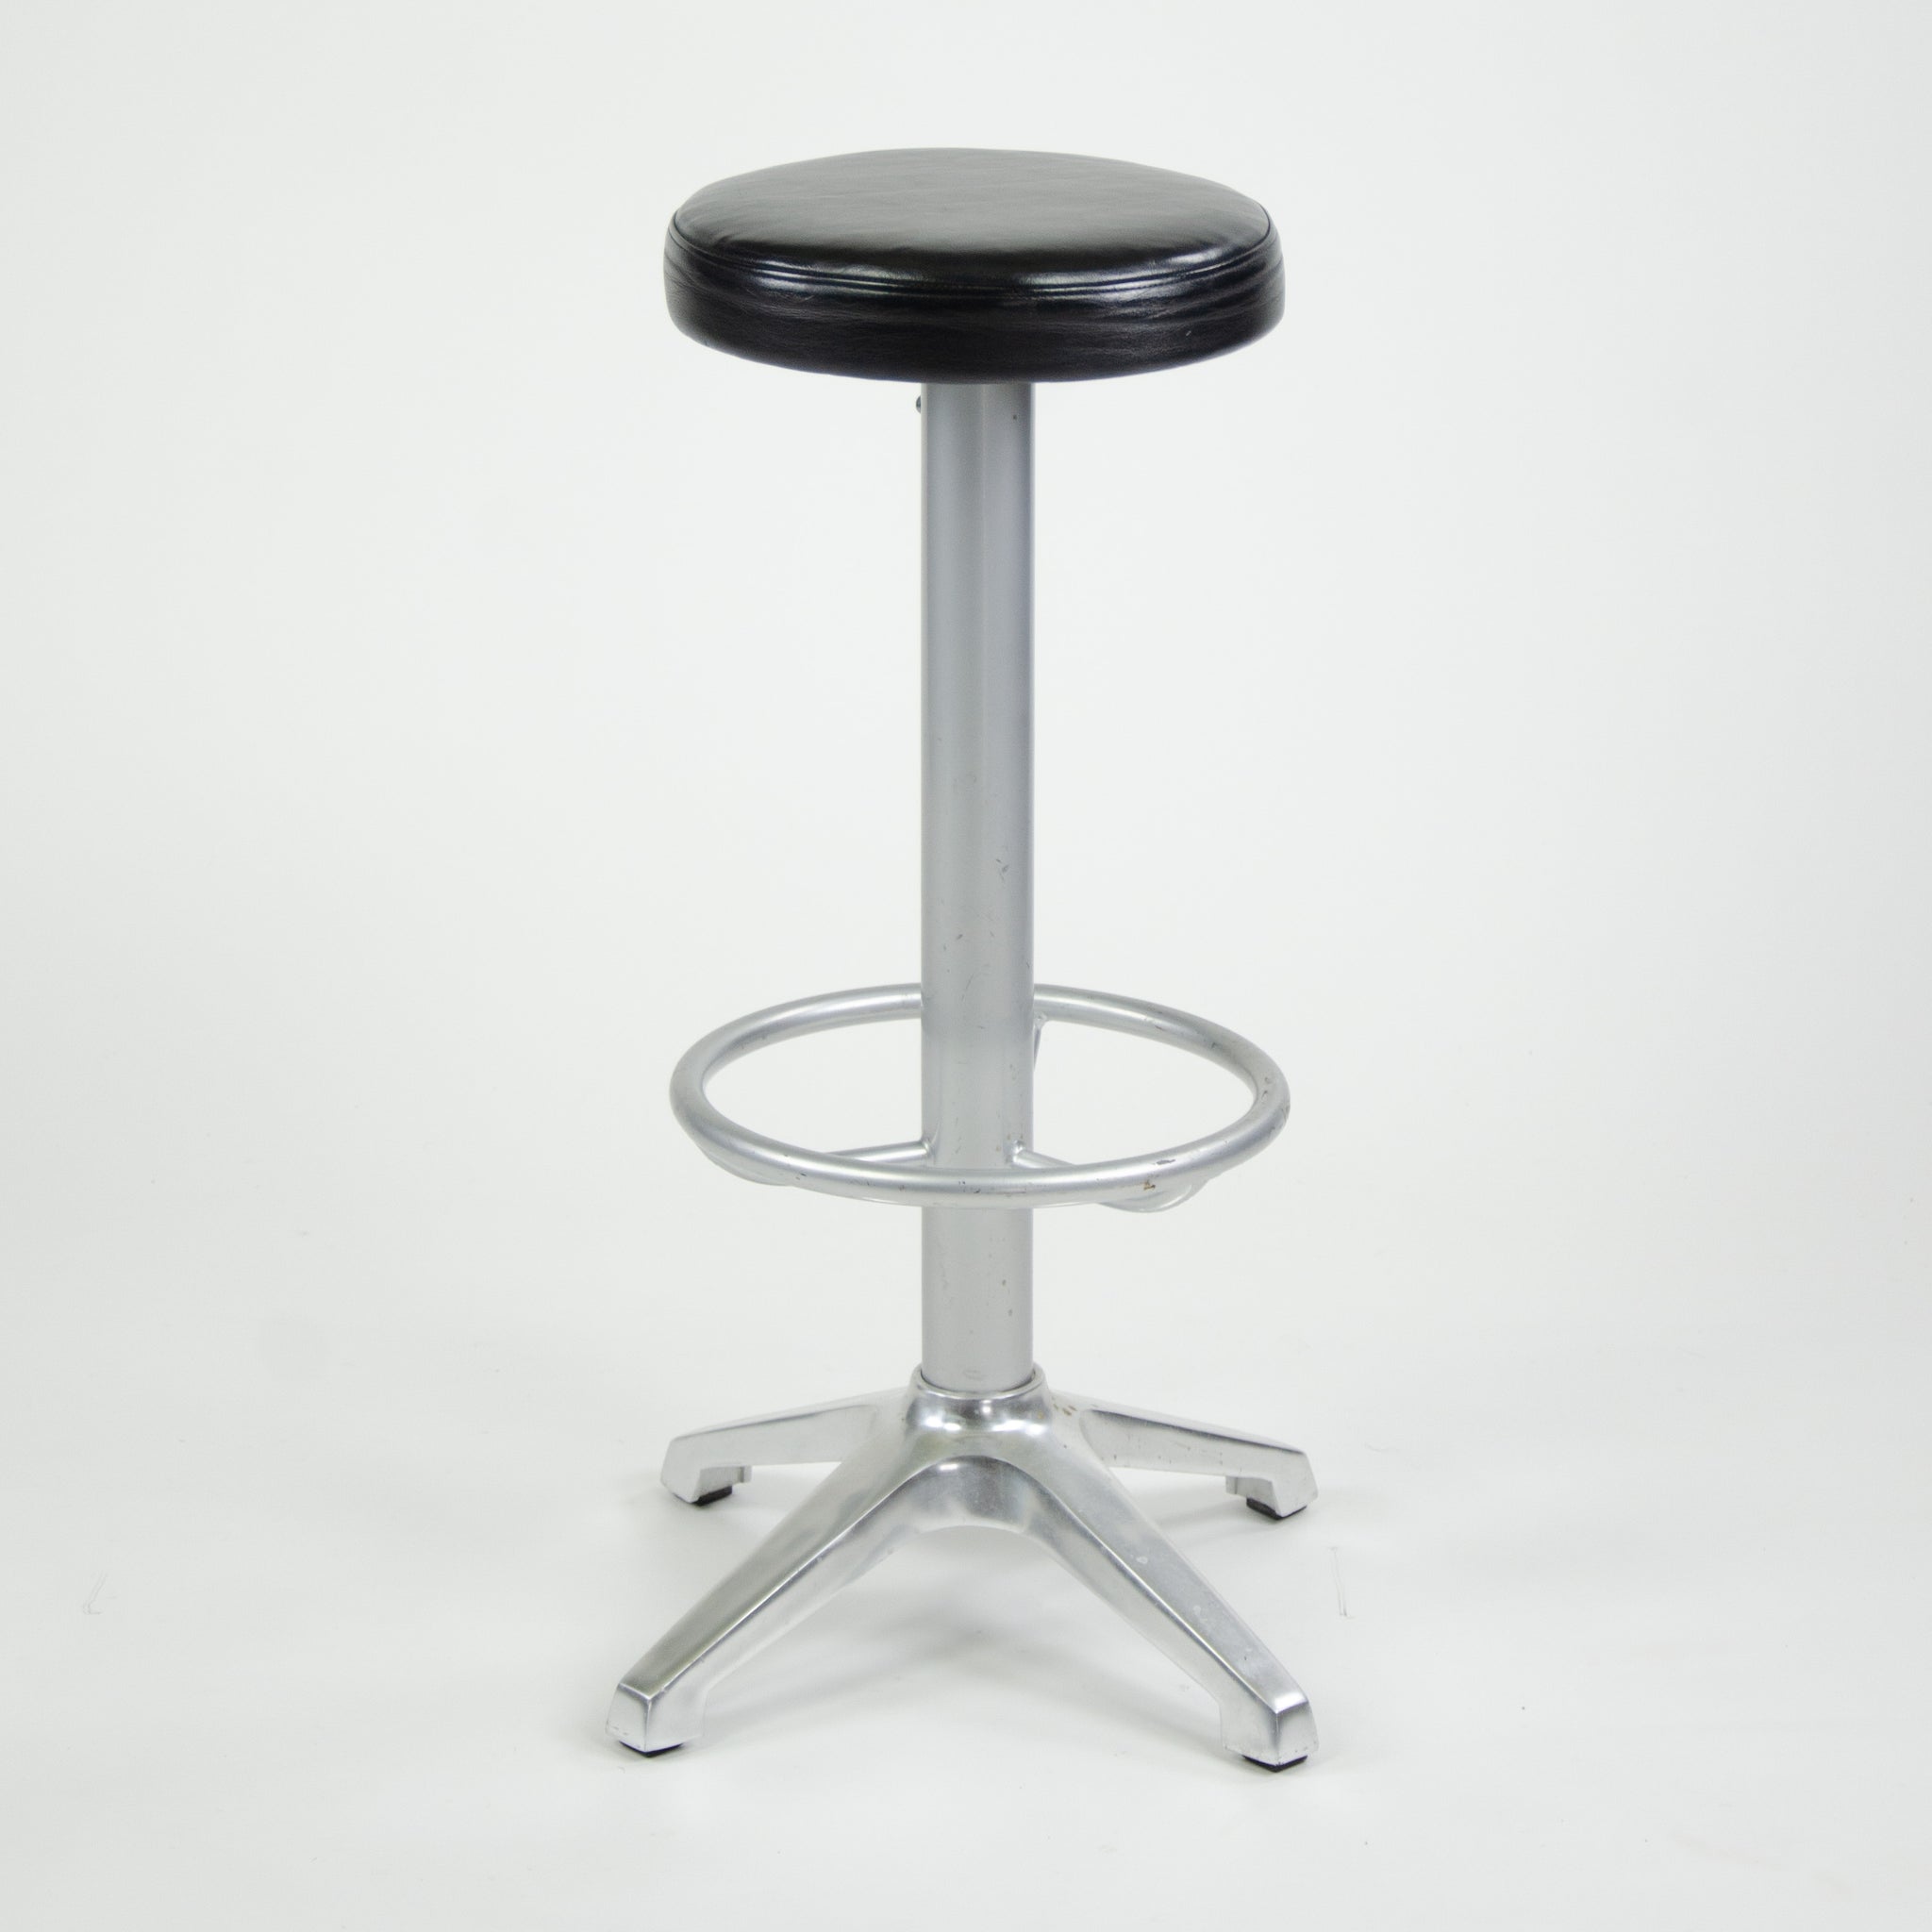 SOLD AMAT-3 Cooper Bar Counter Leather Stools Spain 4x Available